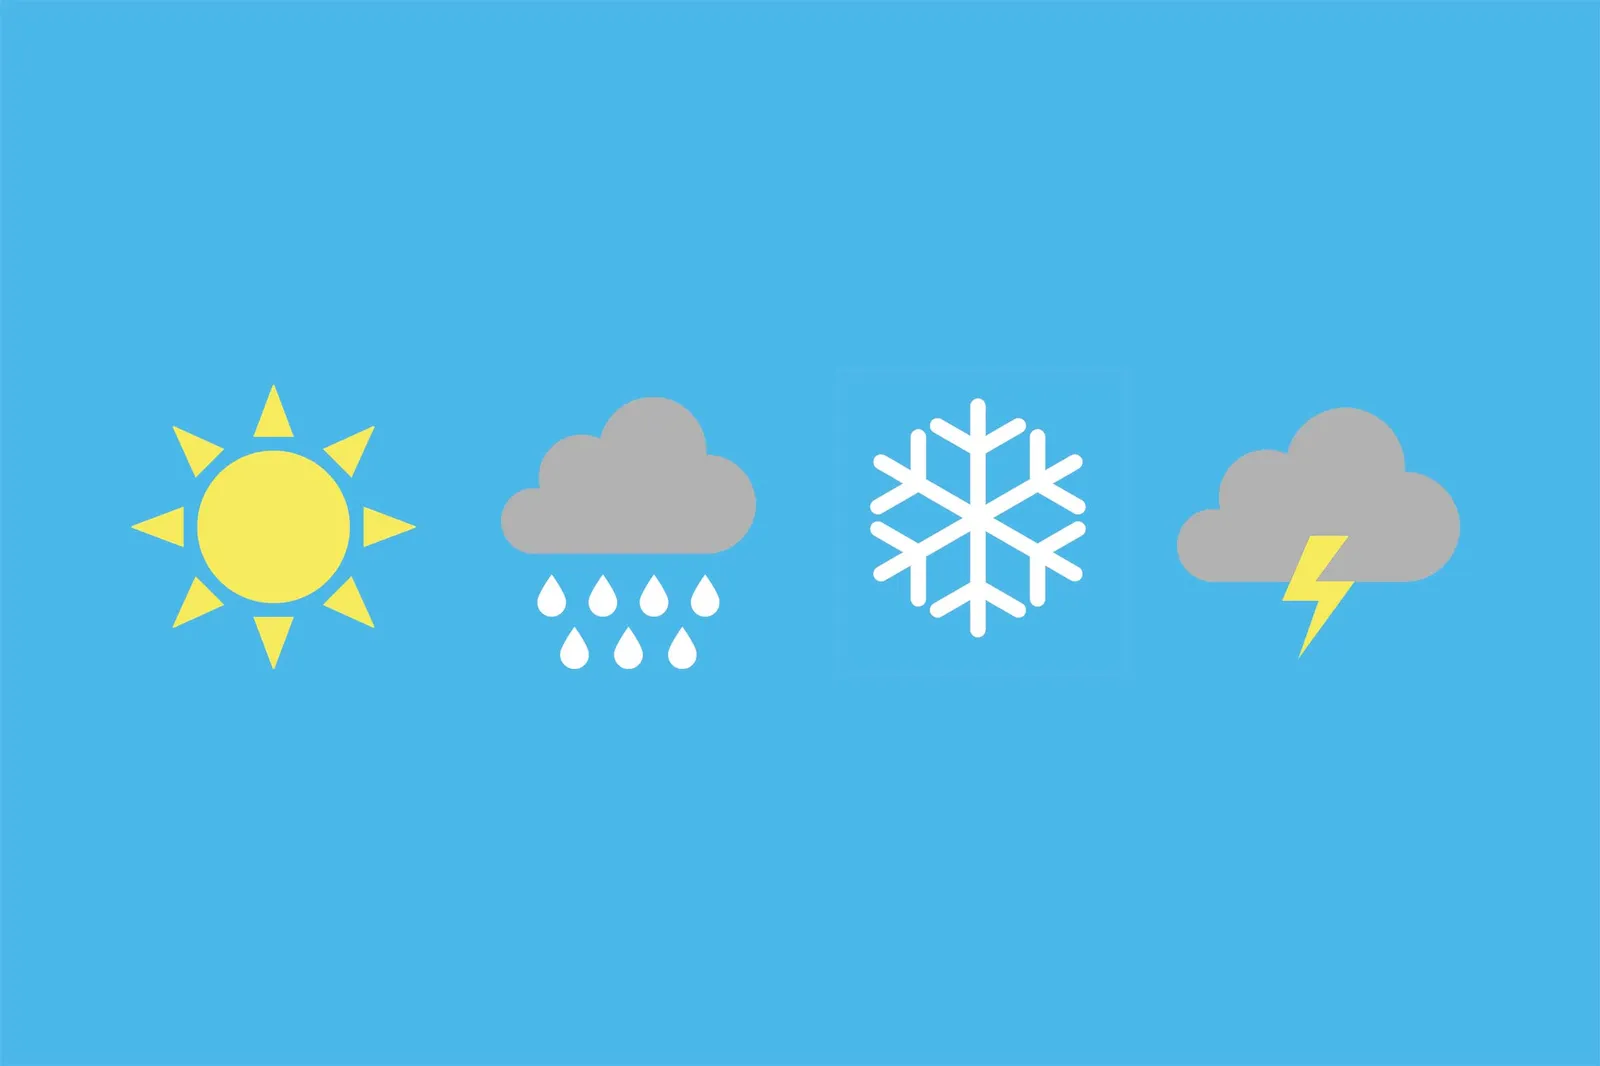 Symbols of weather forecast signs 